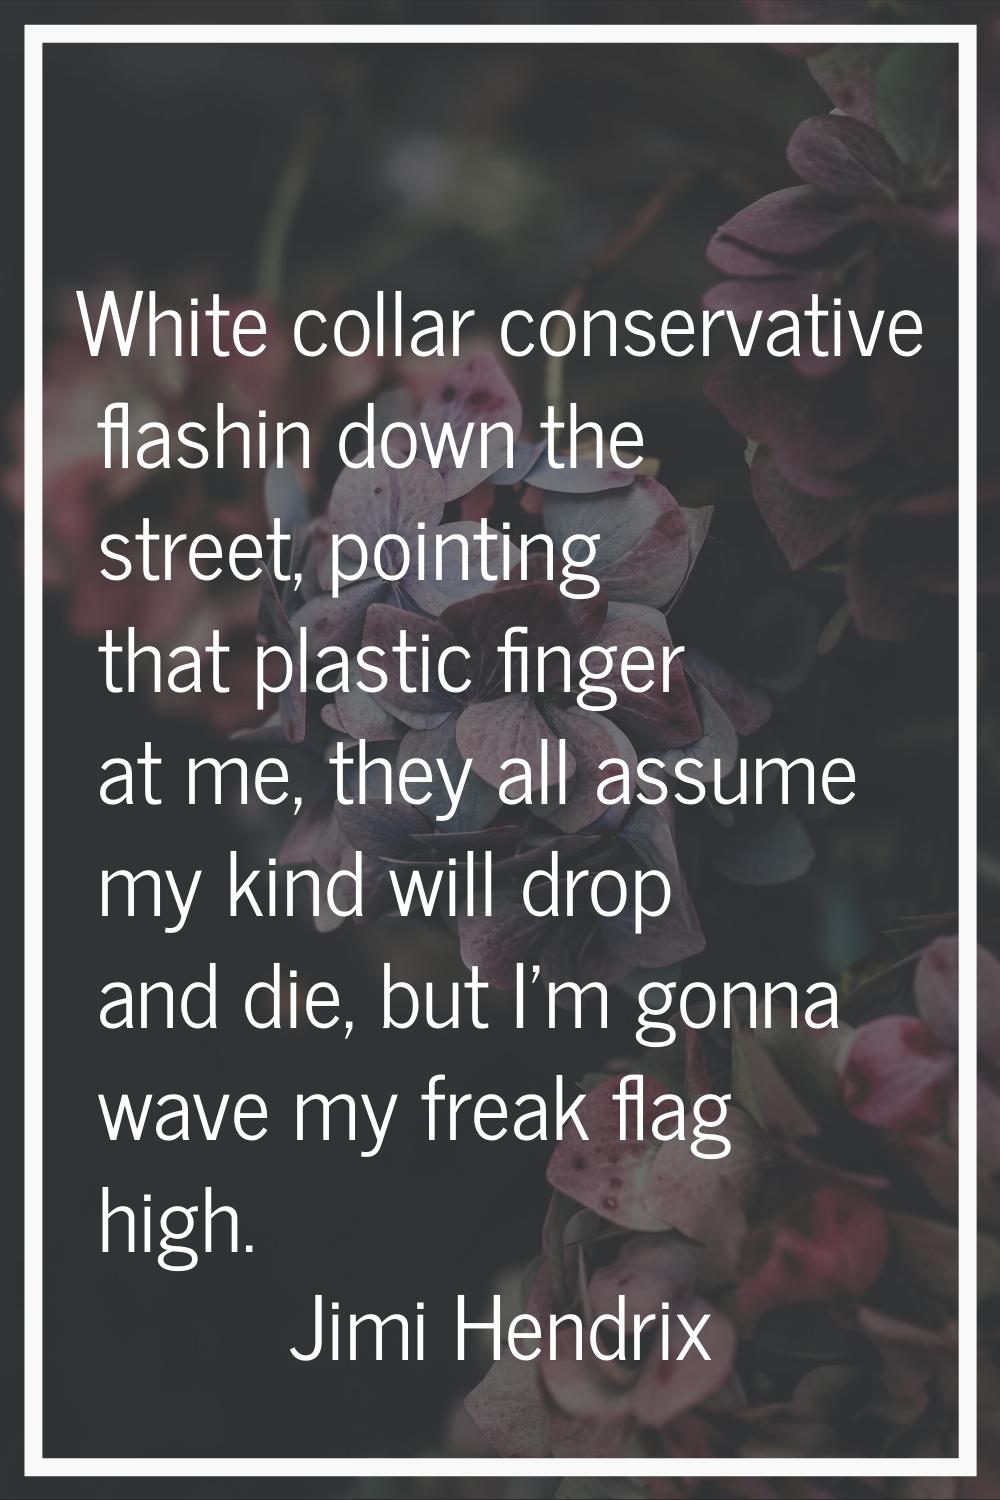 White collar conservative flashin down the street, pointing that plastic finger at me, they all ass